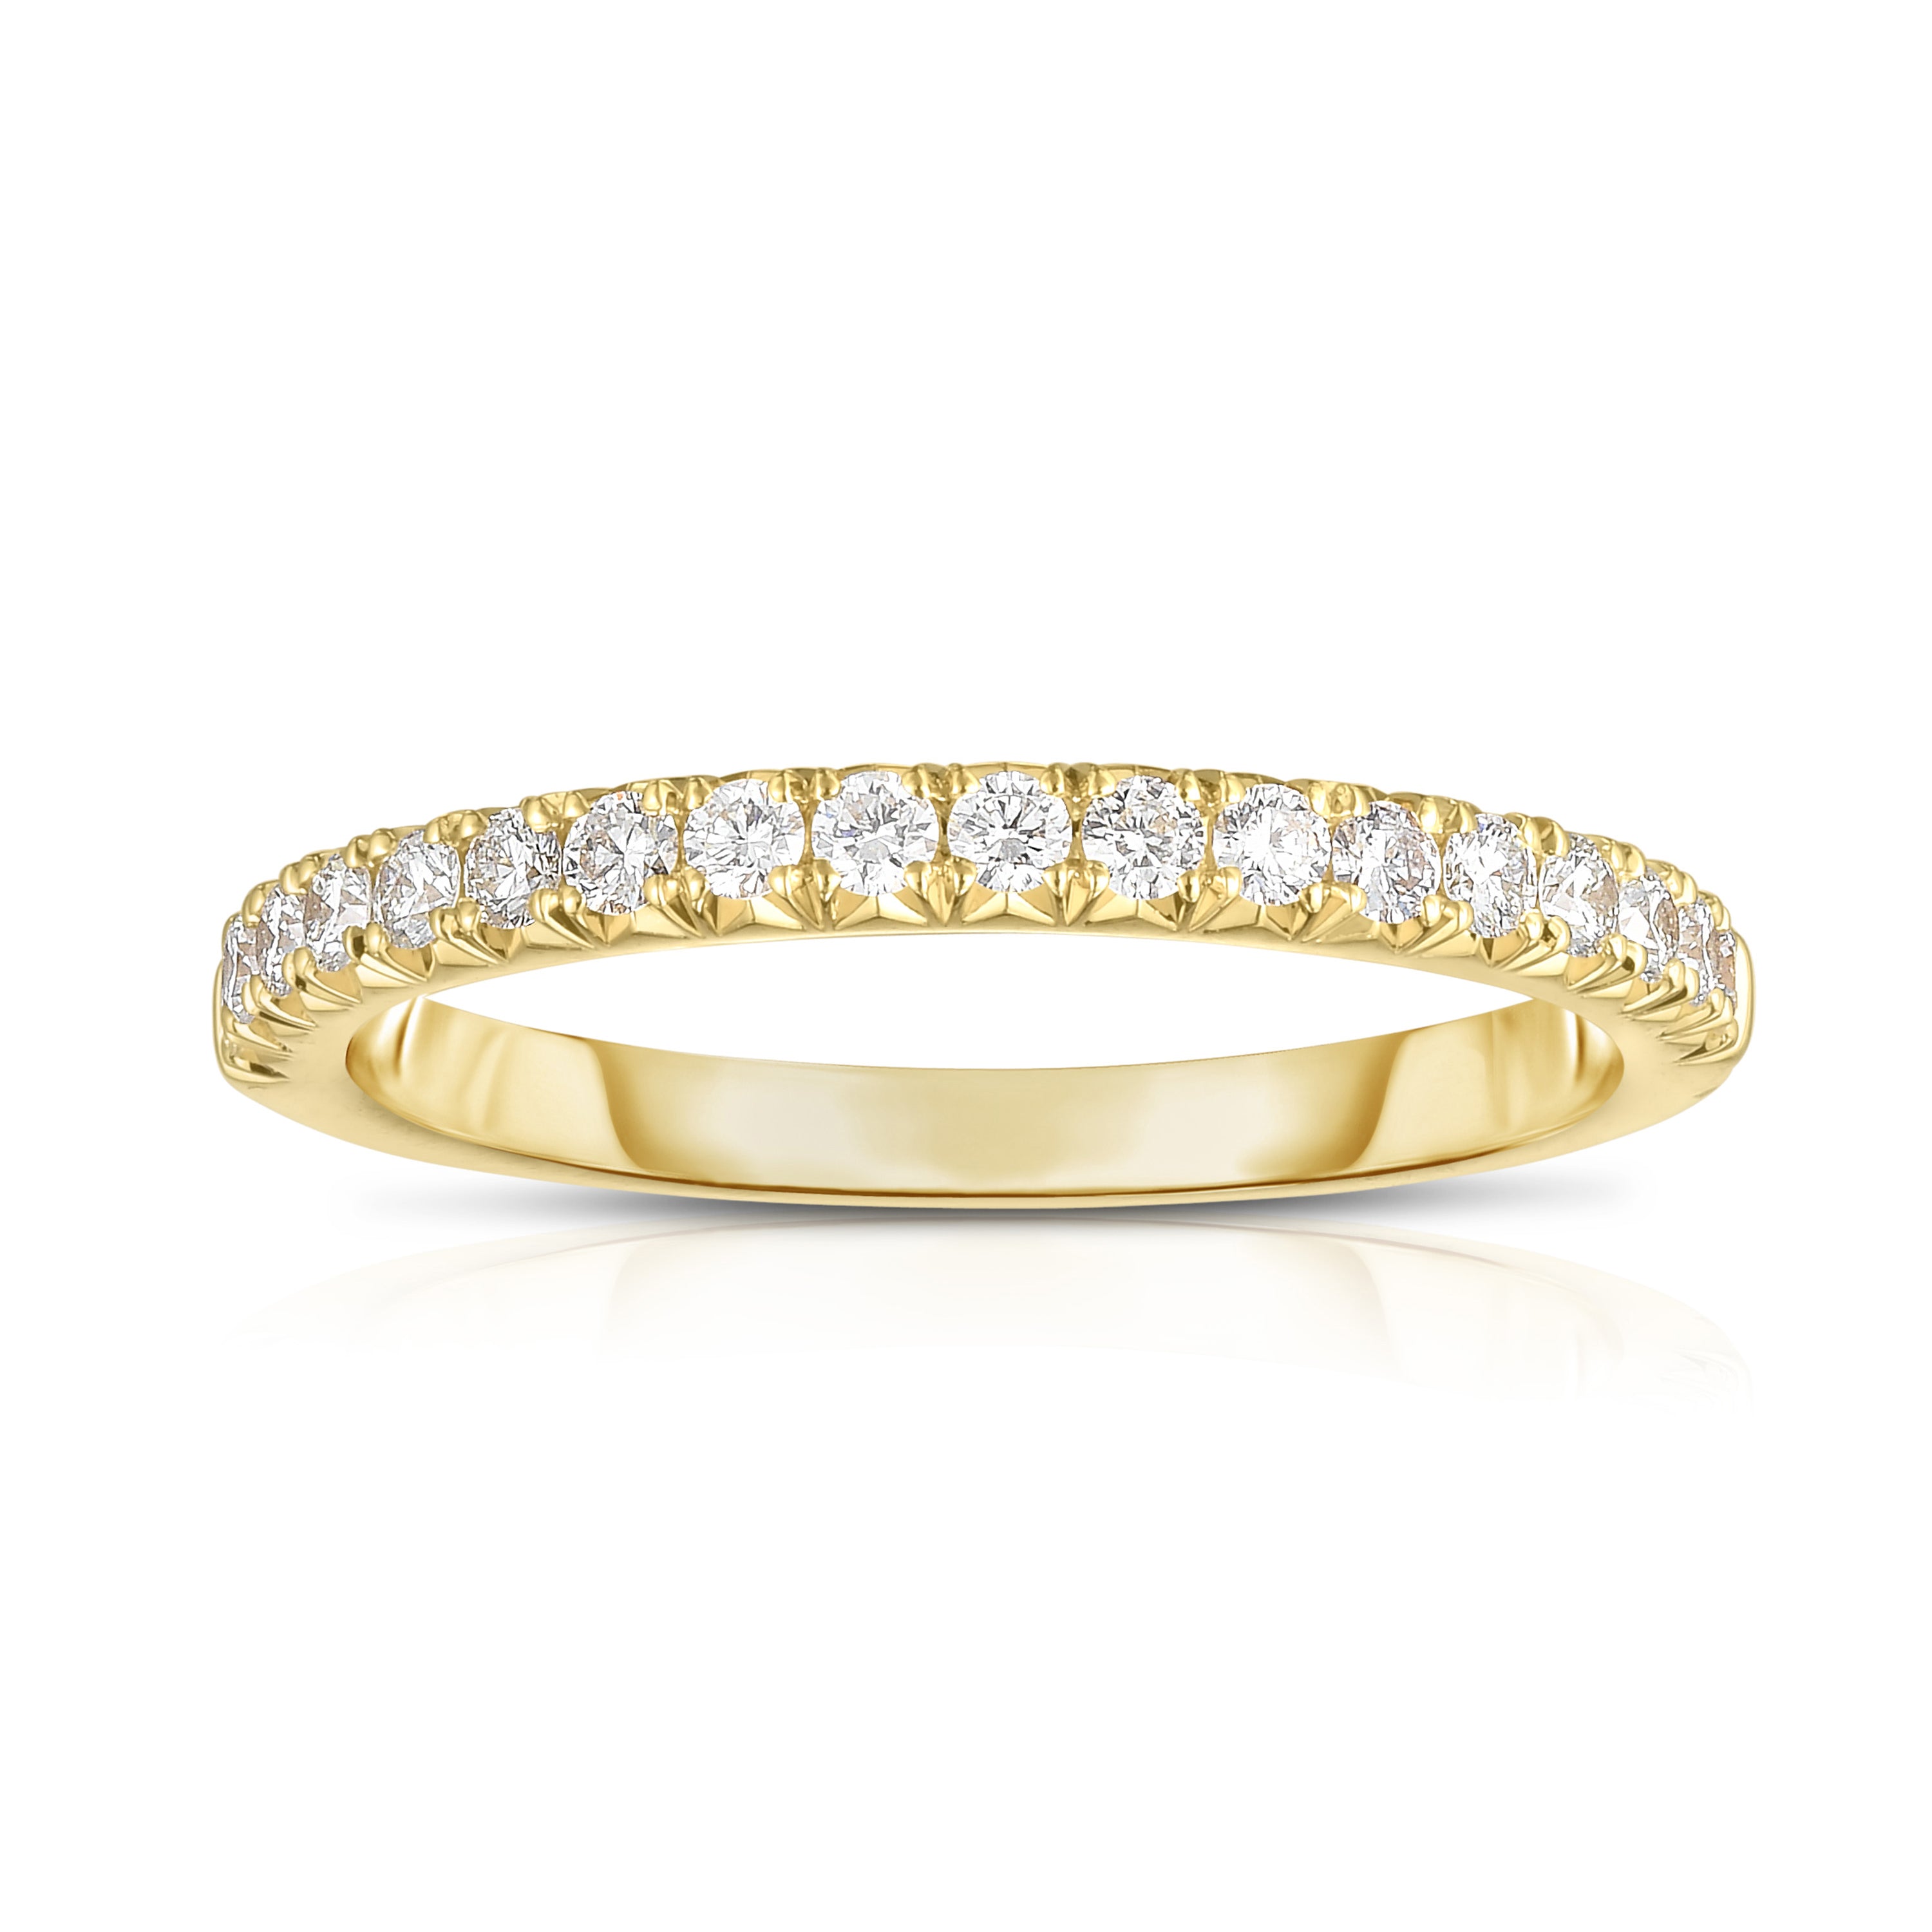 1/2 Way French Cut Diamond band in Yellow Gold